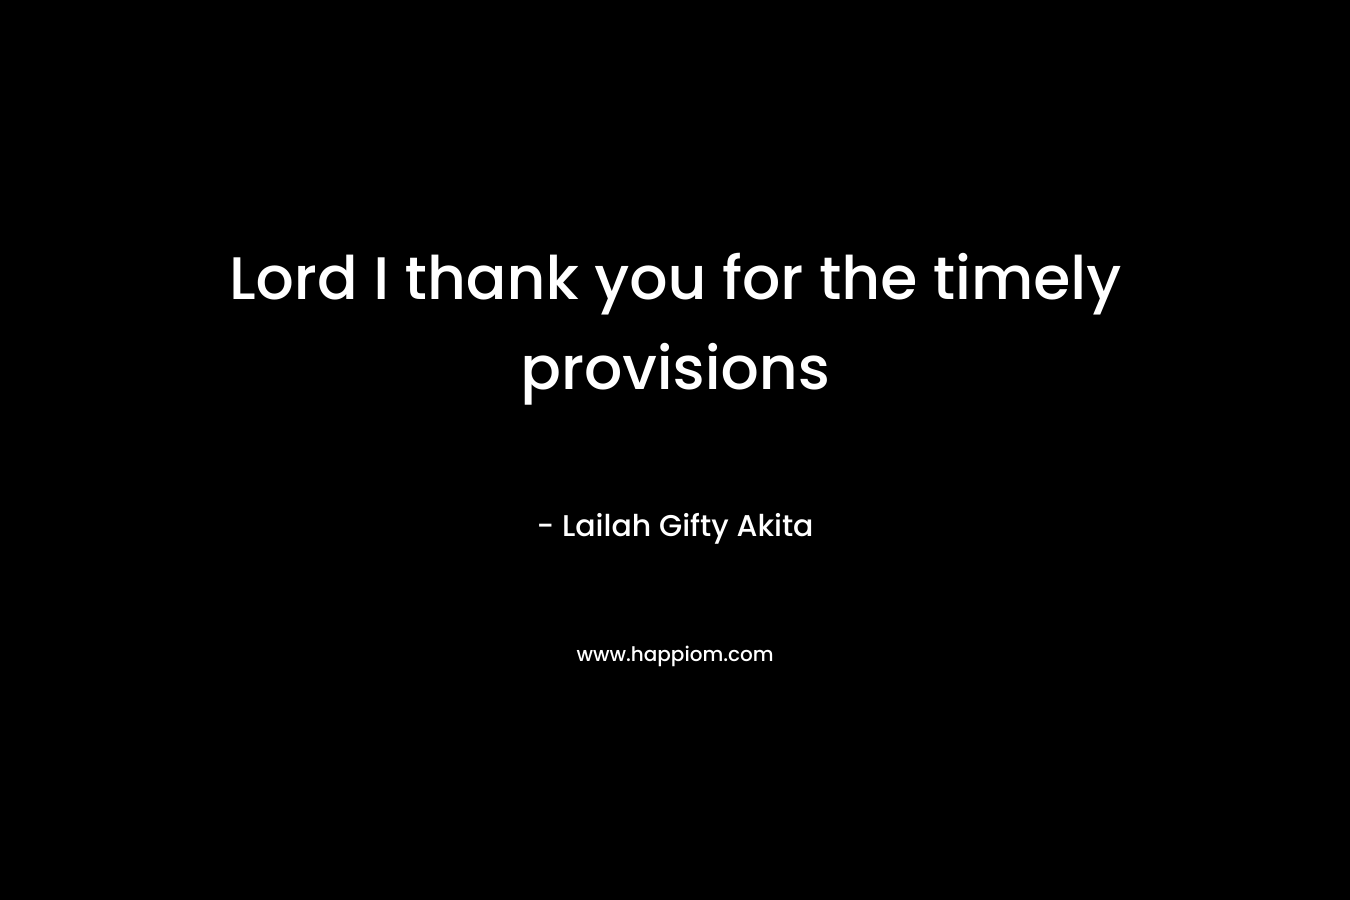 Lord I thank you for the timely provisions